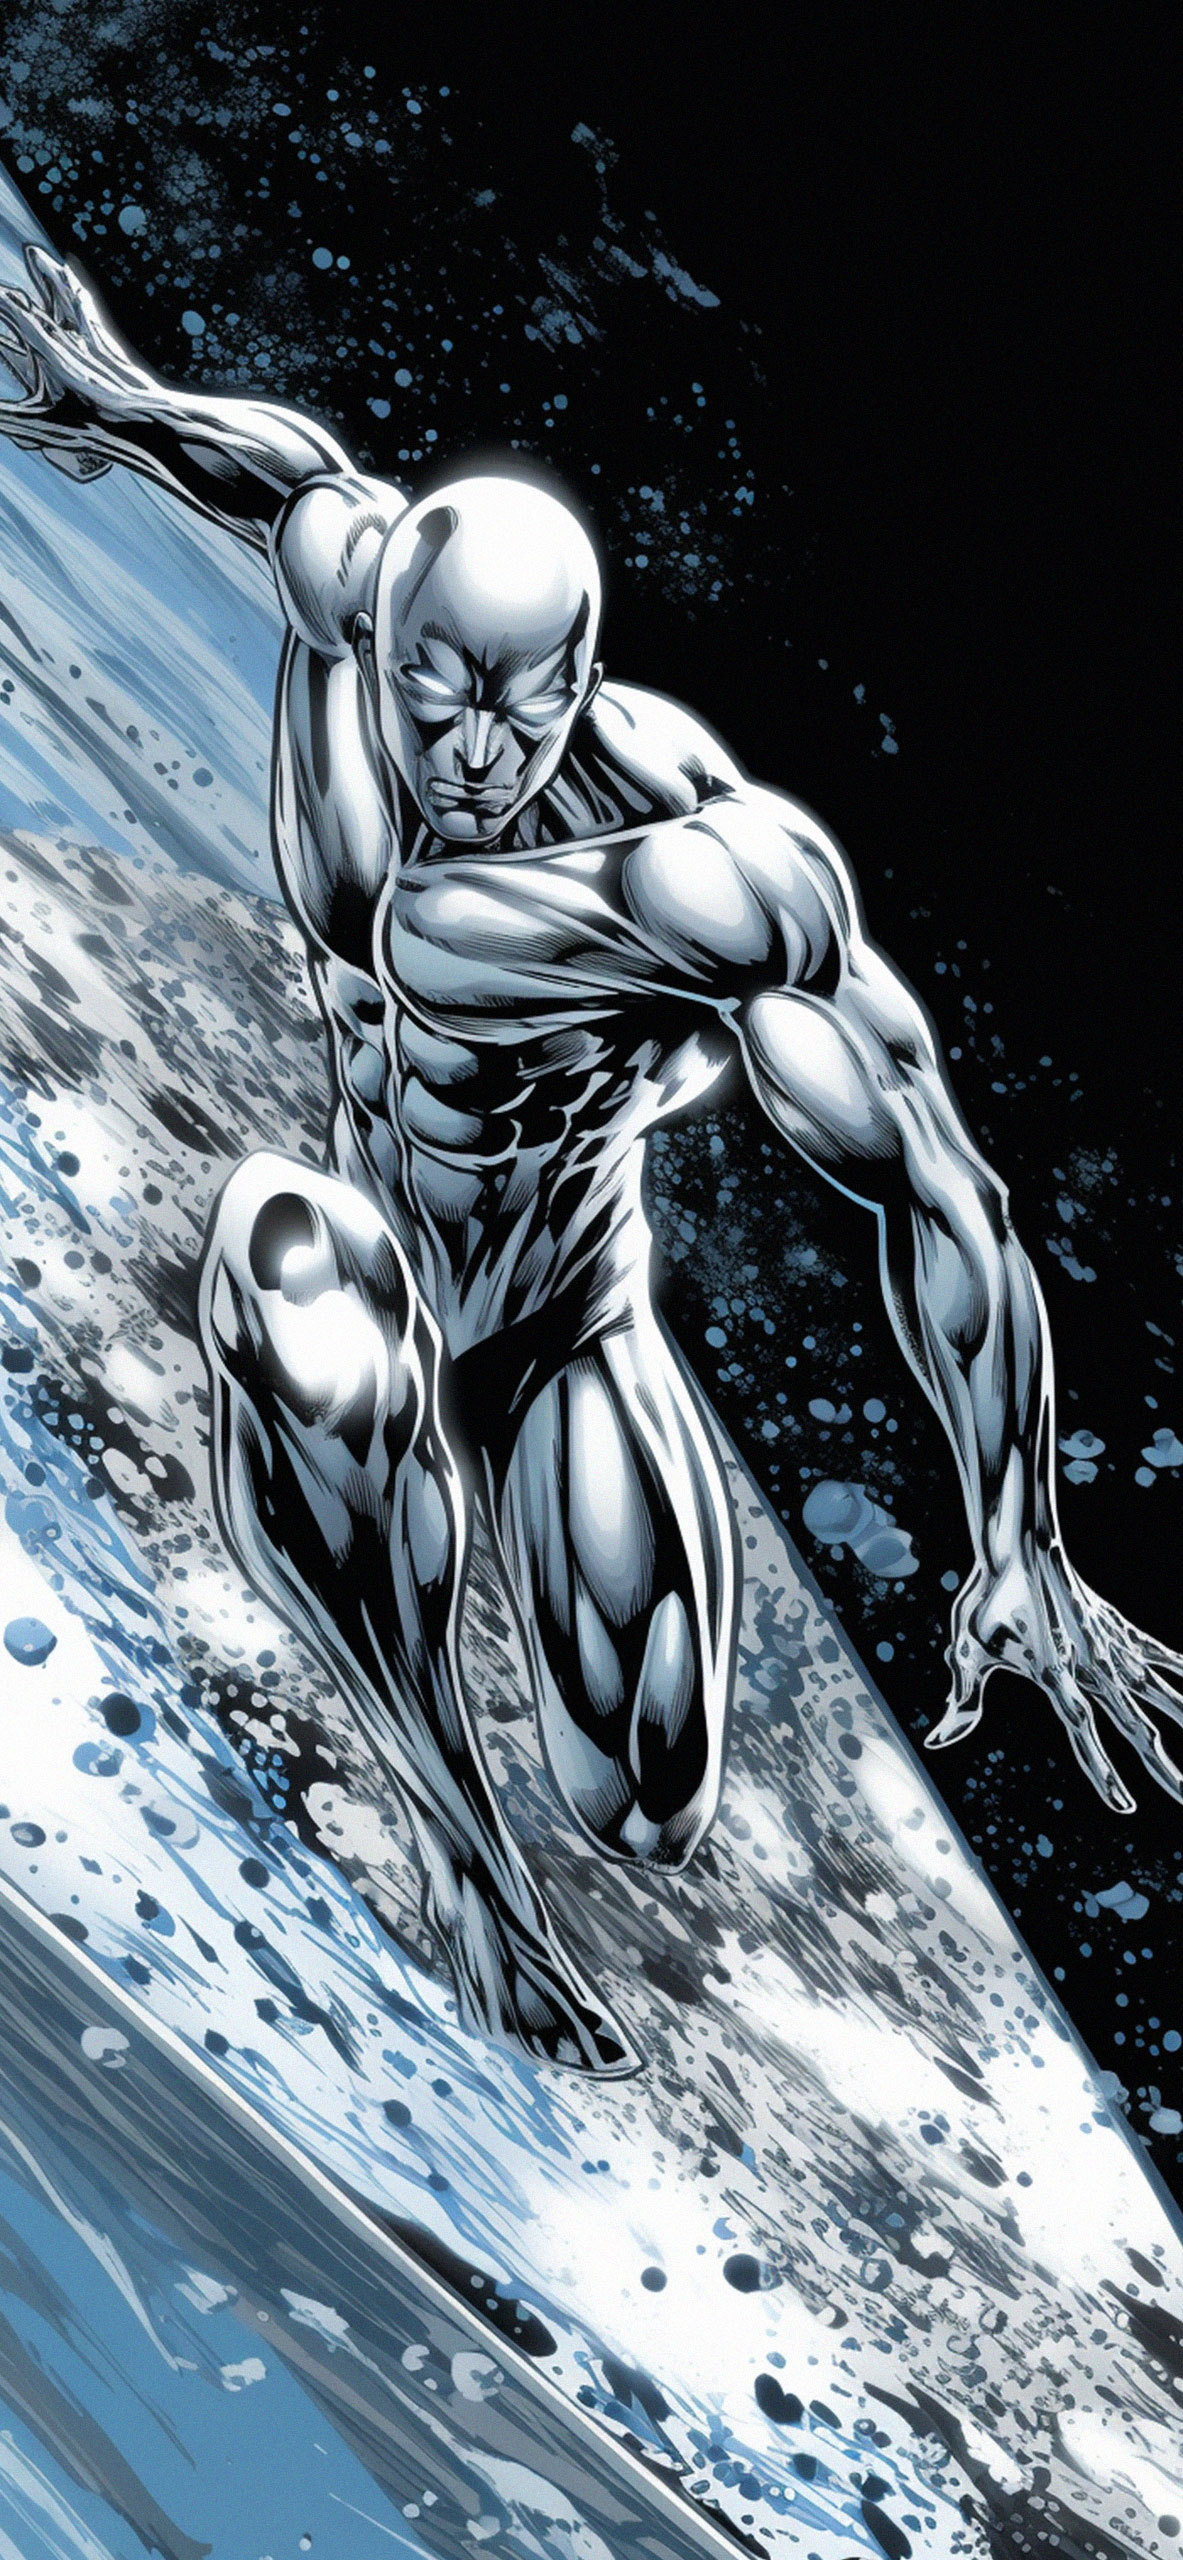 Silver Surfer Wallpapers  Top 20 Best Silver Surfer Wallpapers Download